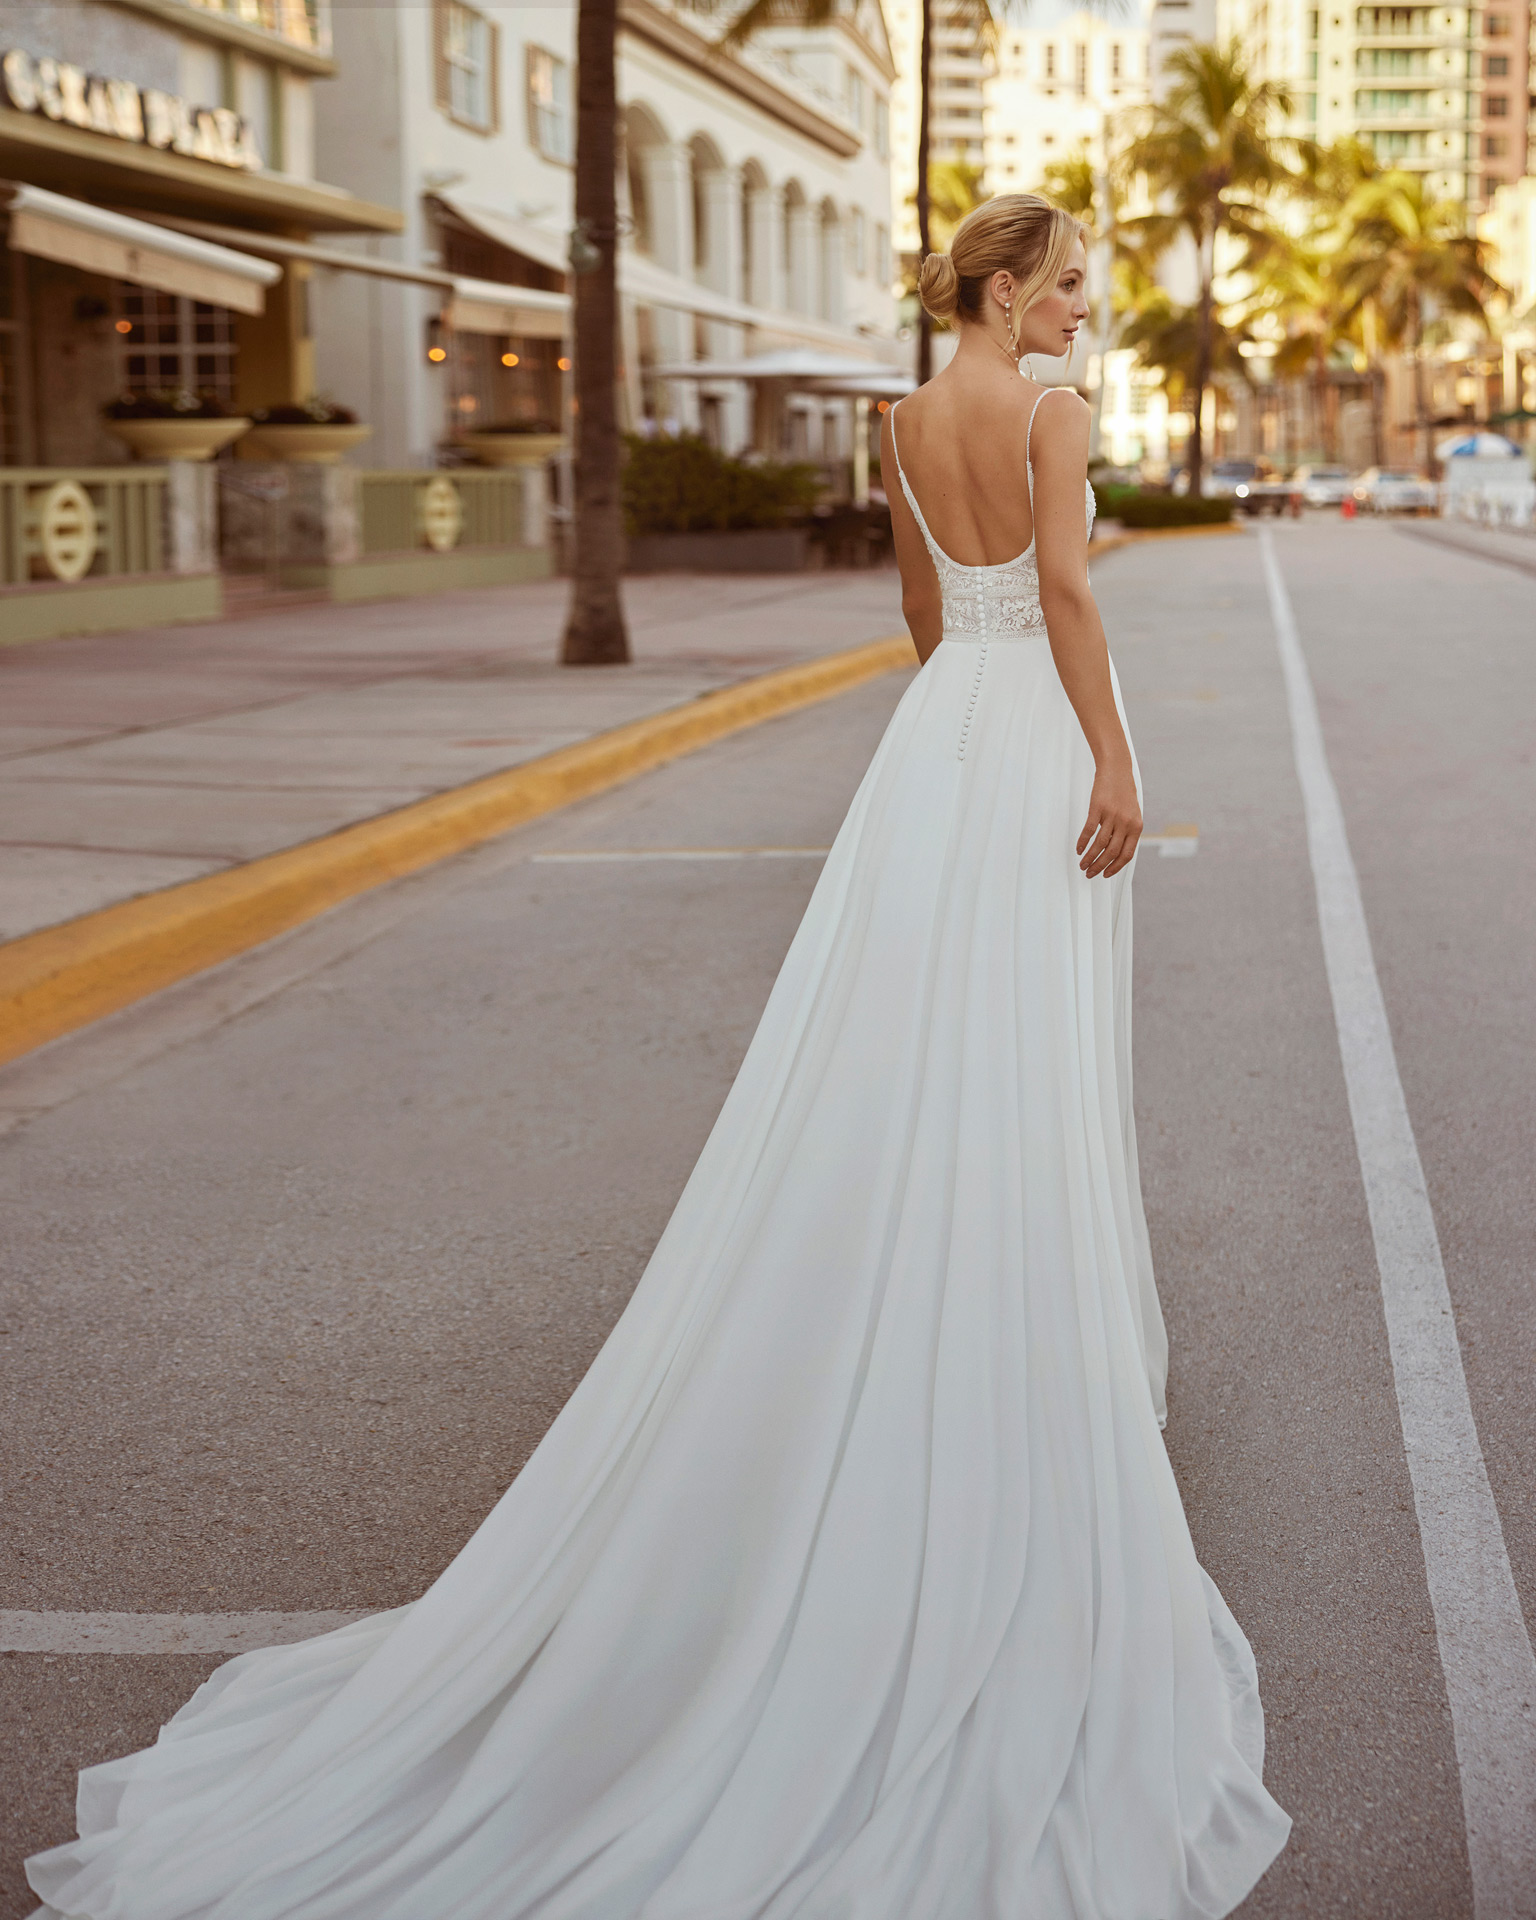 Princess-style A-line wedding dress, crafted in georgette. This Luna Novias dress is guaranteed to leave you captivated, with its round neckline and open back with straps. LUNA_NOVIAS.